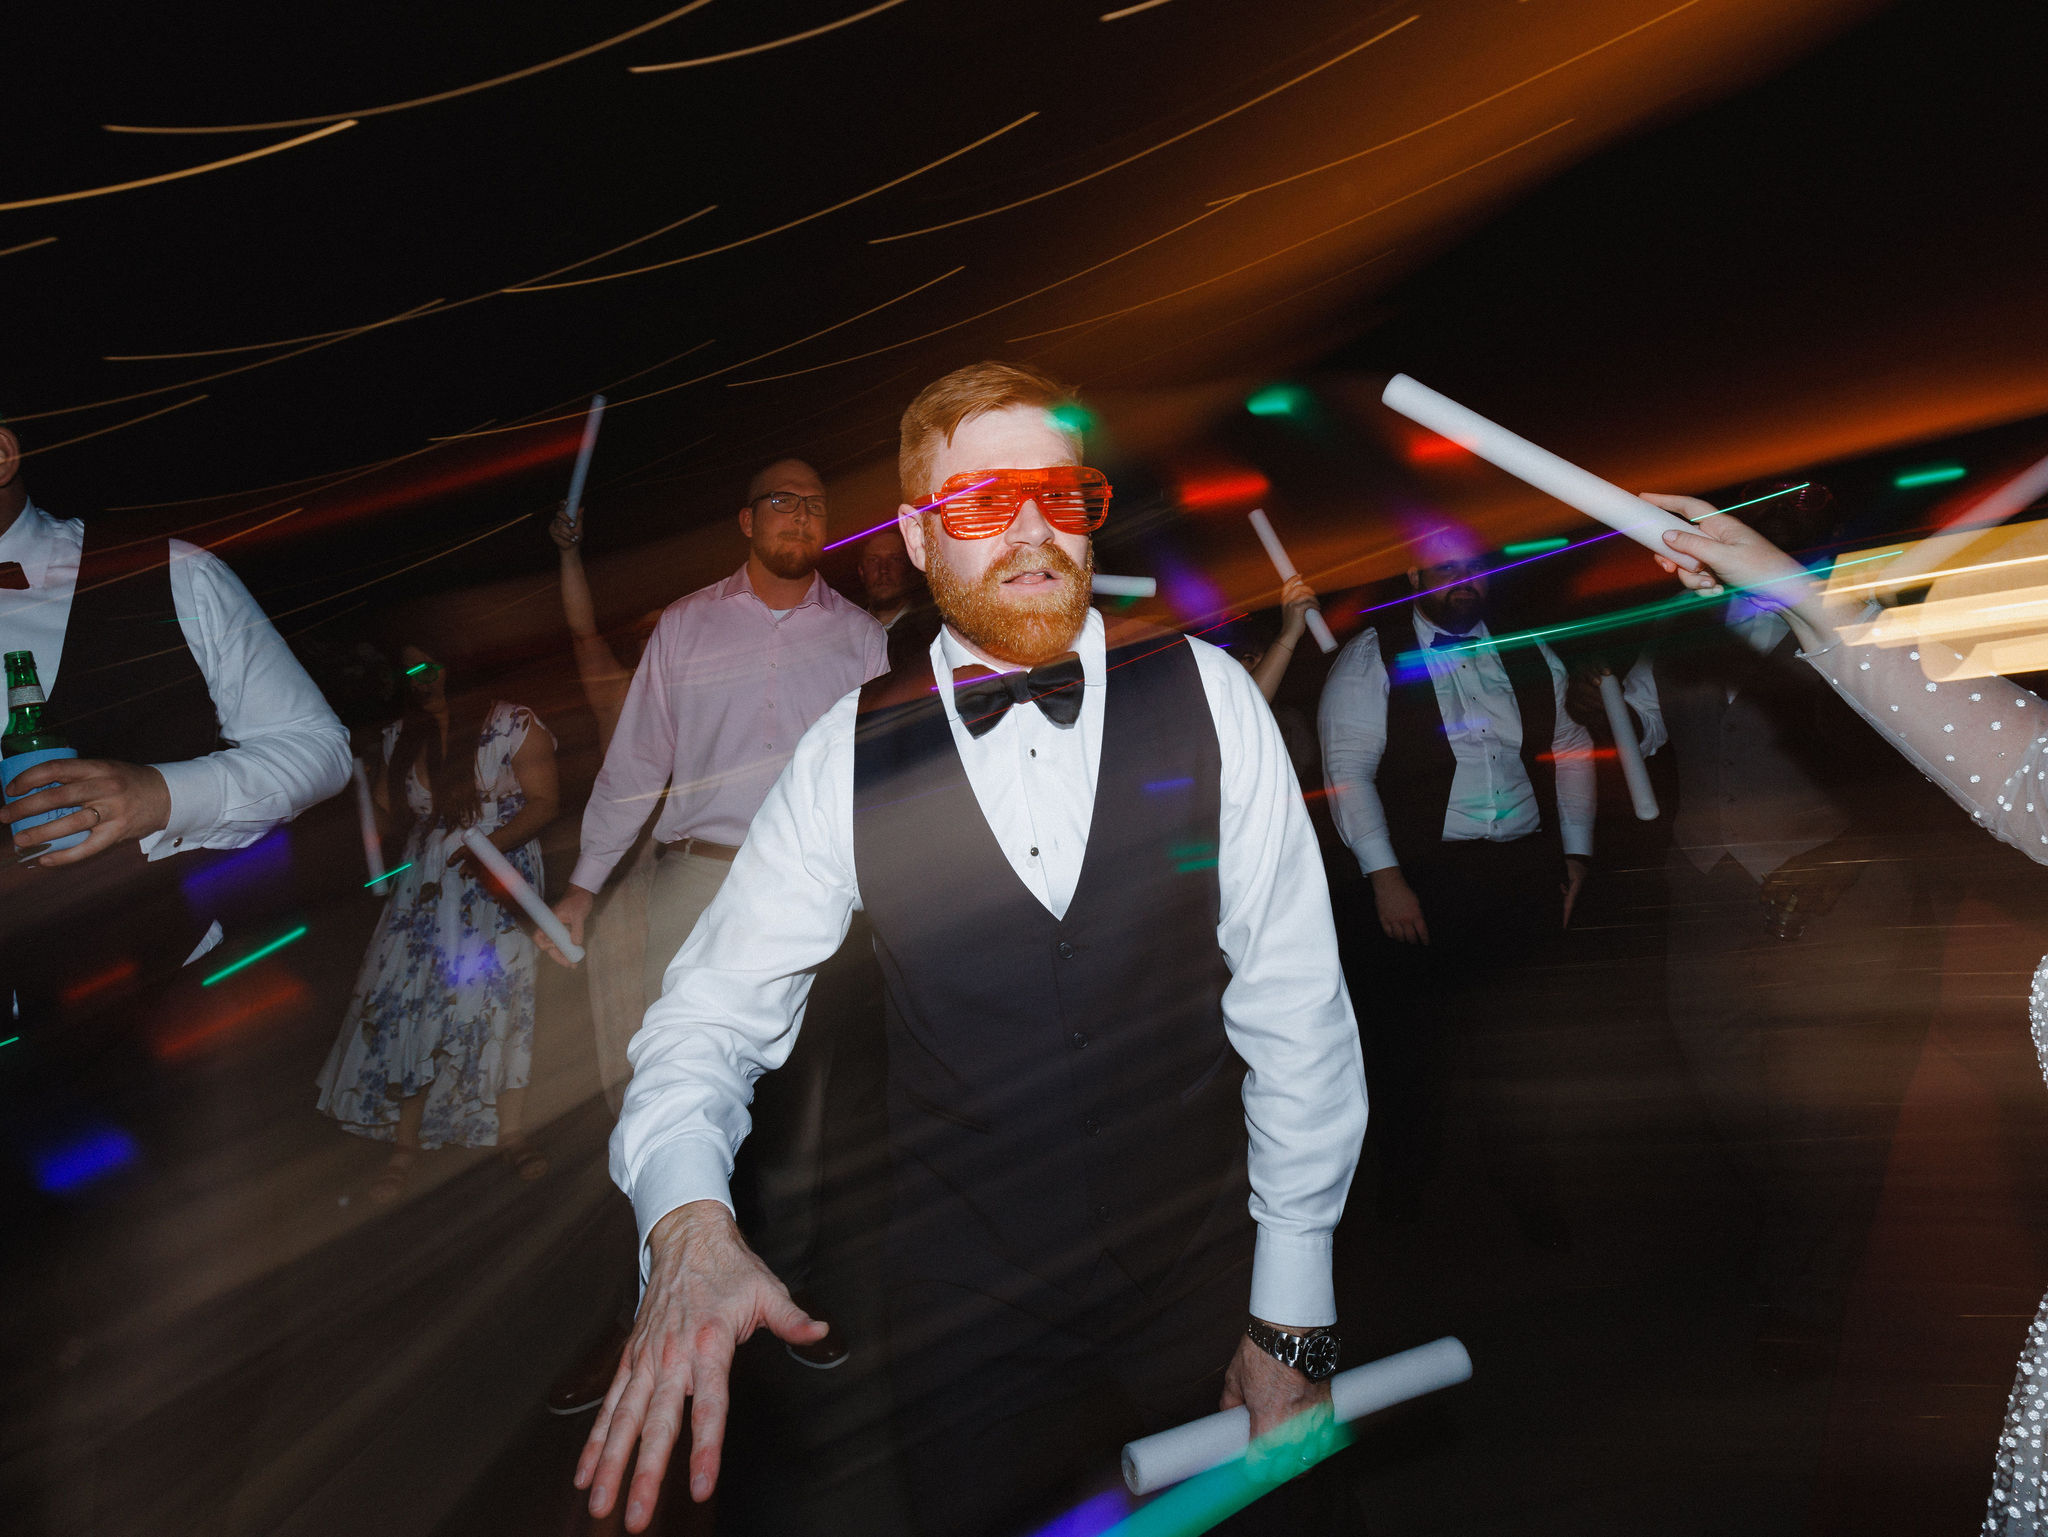 Bobby wearing sunglasses and carrying a glowstick on the dance floor at his wedding